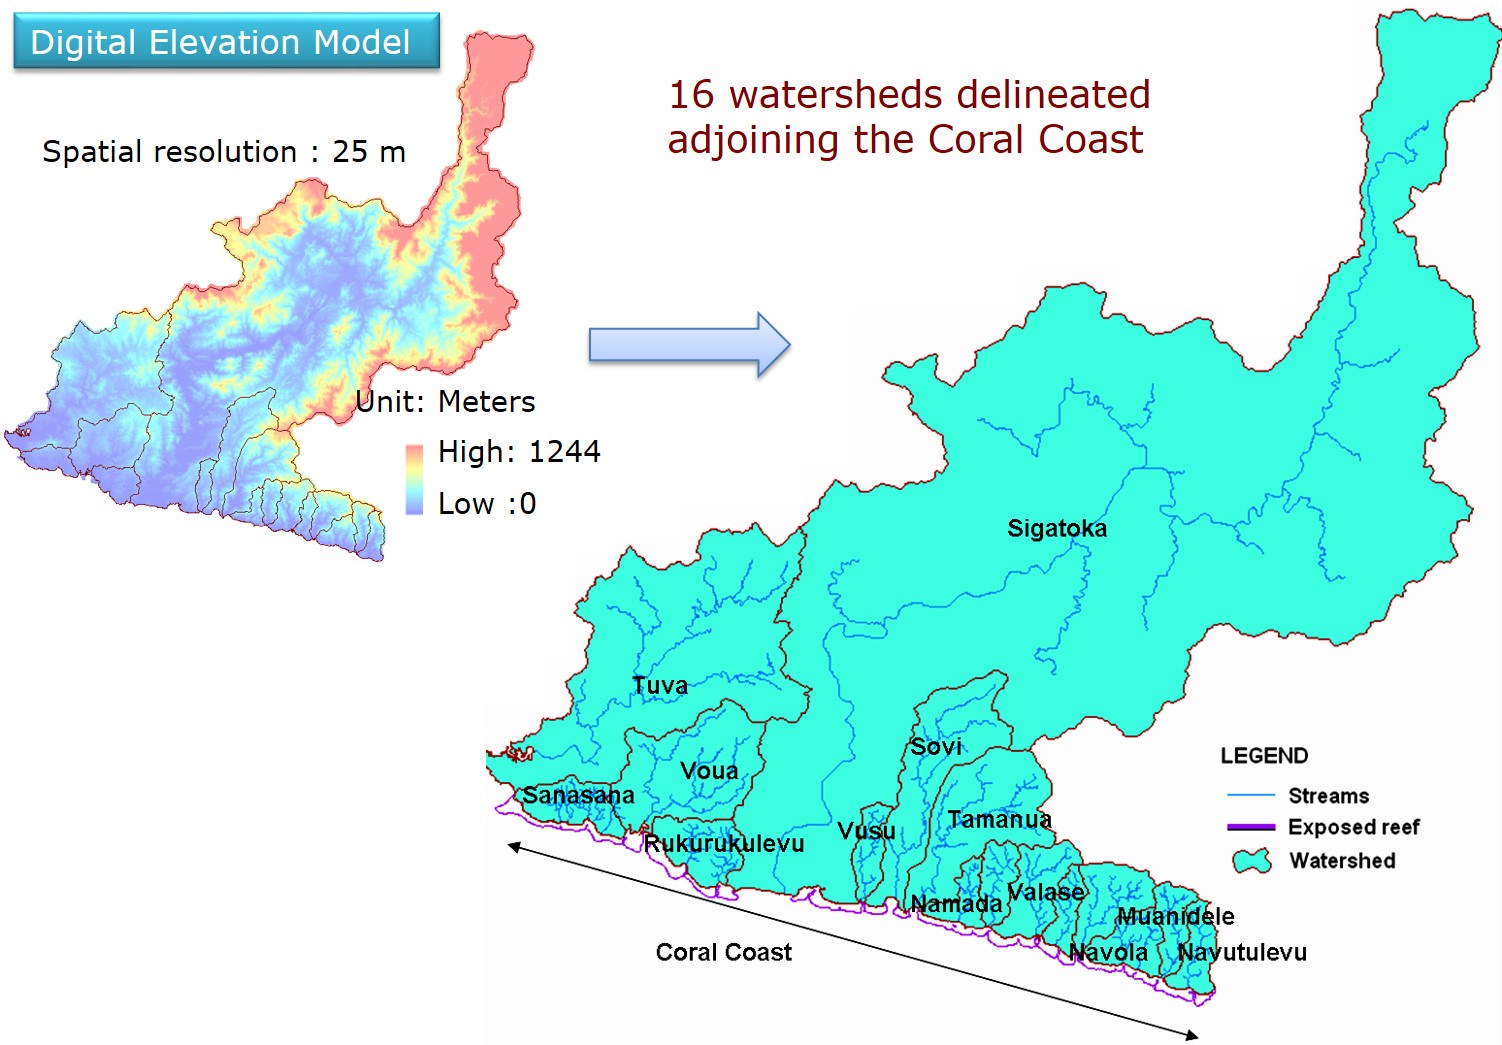 How GeoSpatial Technology used for Watershed Delineation